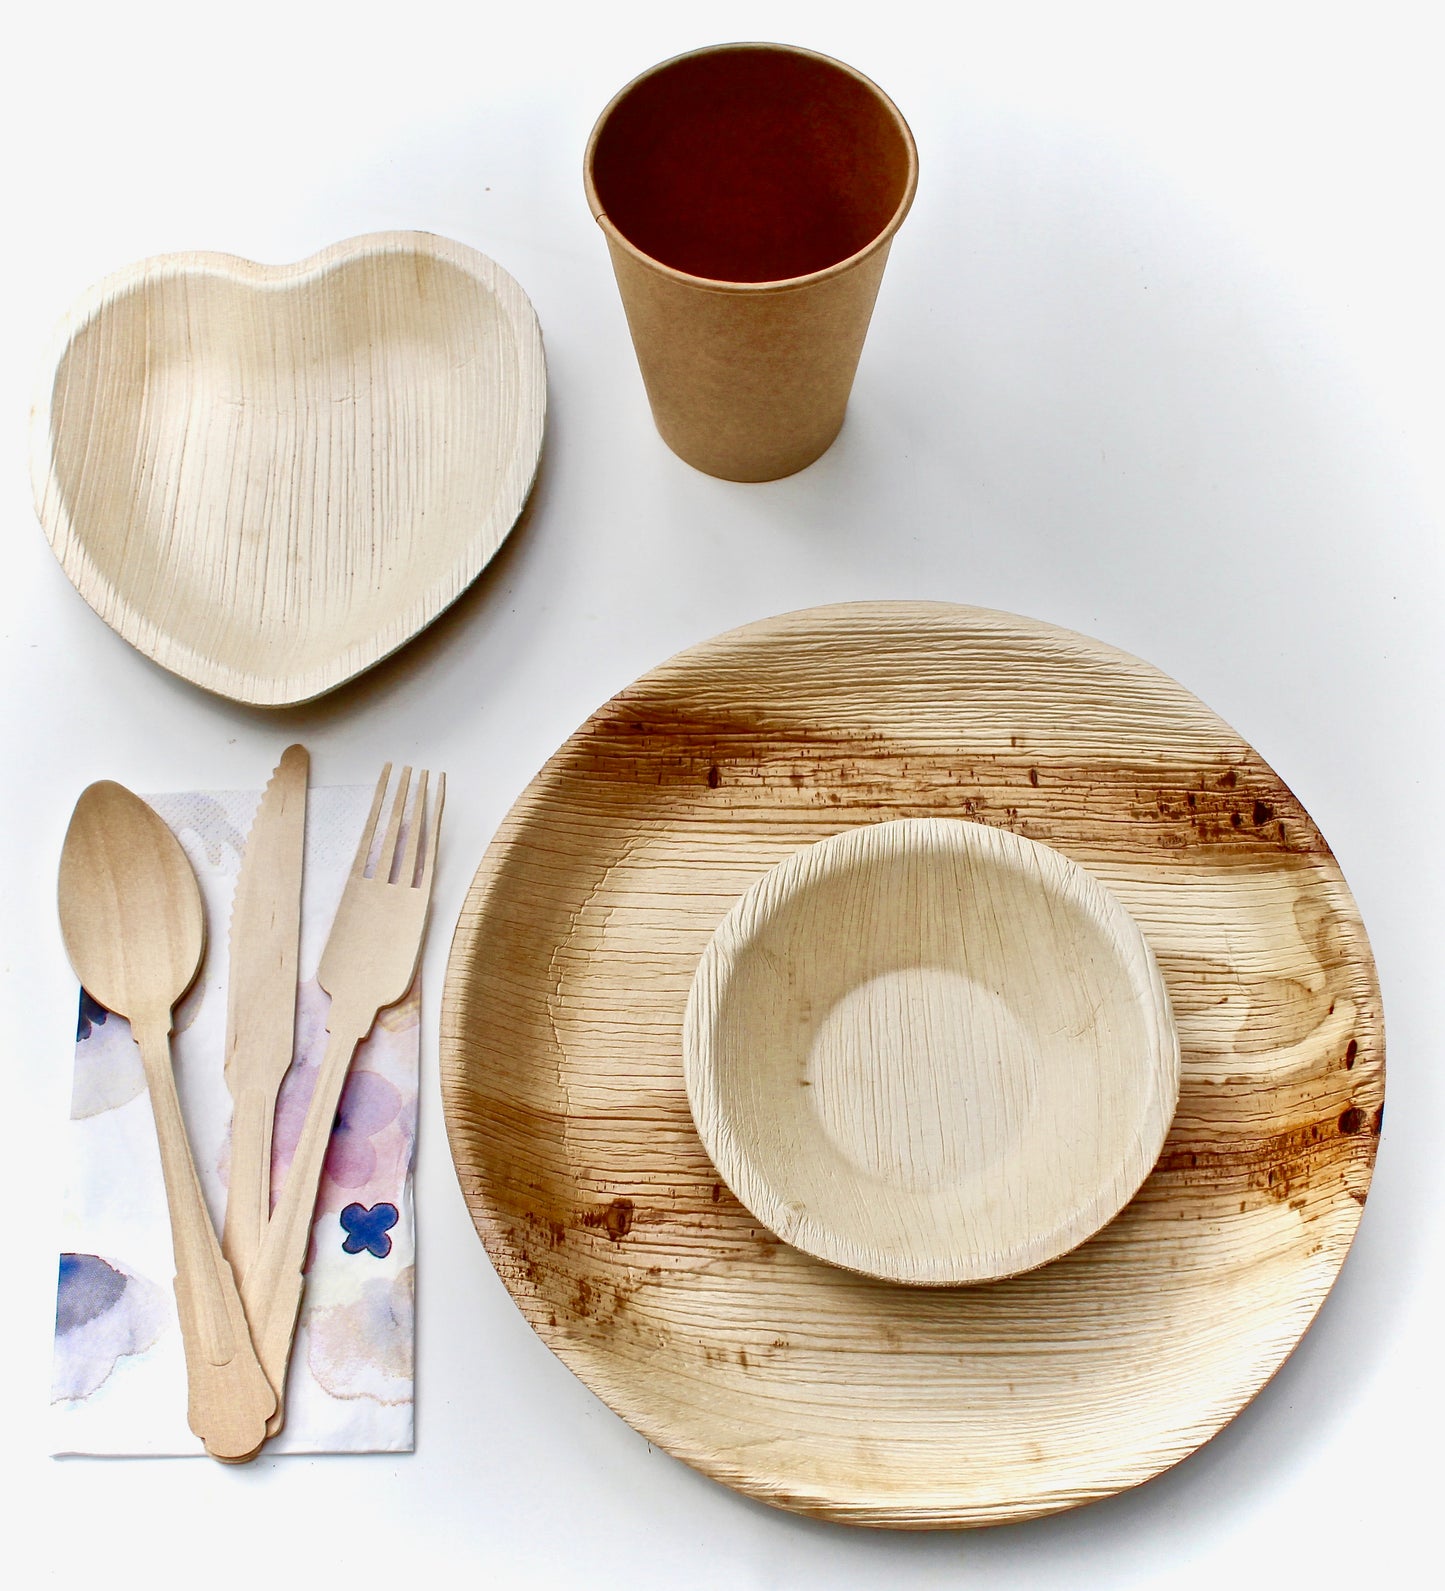 Palm Leaf Plate 20 Pic Round 10" - 20 pic Sea Grape 7" - 20 Pic Heart 6" - 20 Pic Cup - 20 Pic Napkin - 60 Pic Utensils